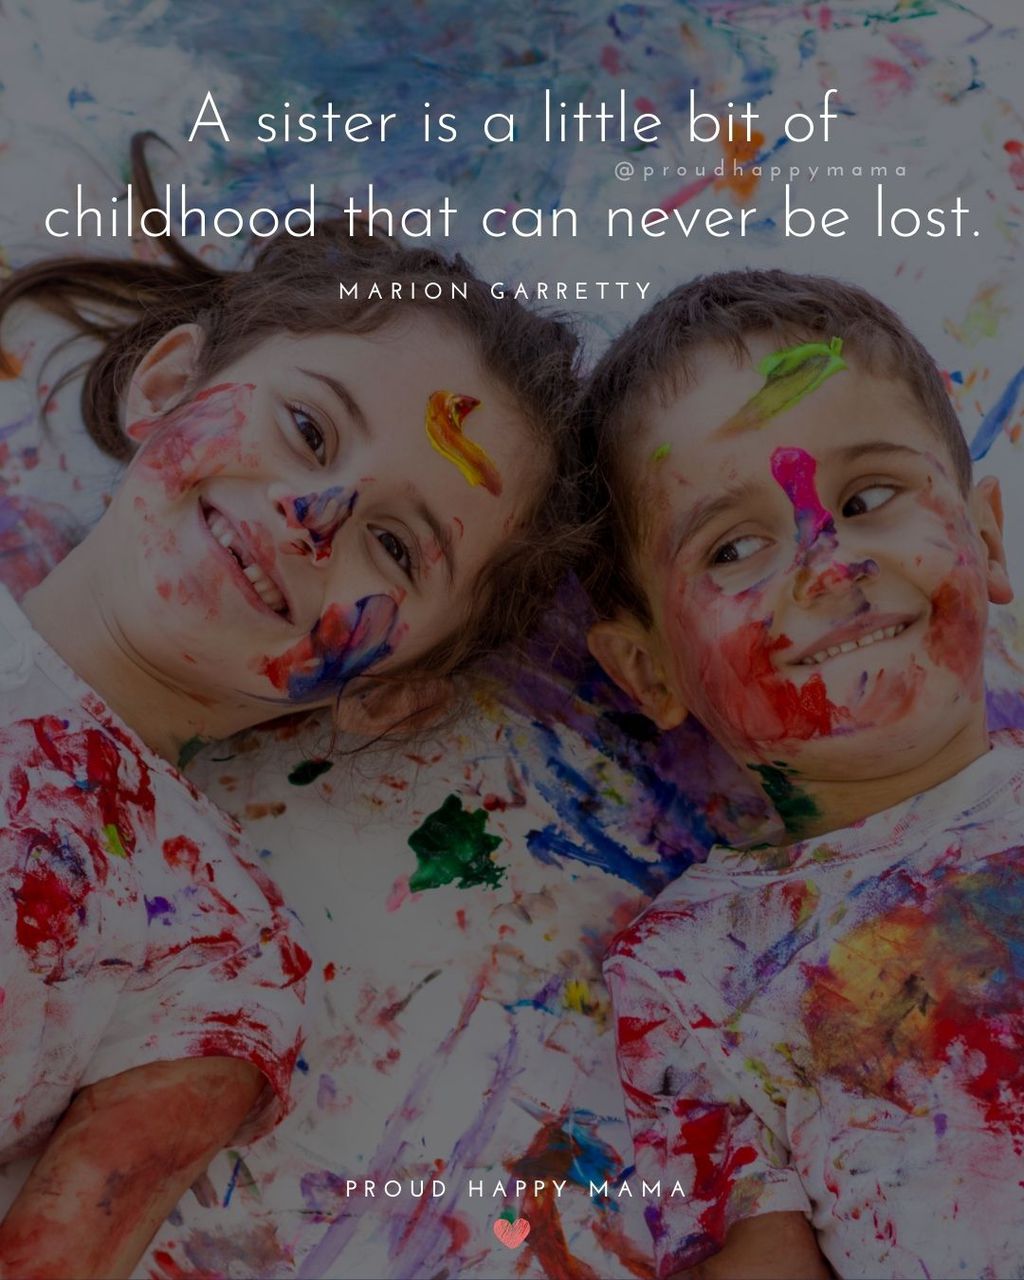 Sister Quotes - A sister is a little bit of childhood that can never be lost - Marion Garretty